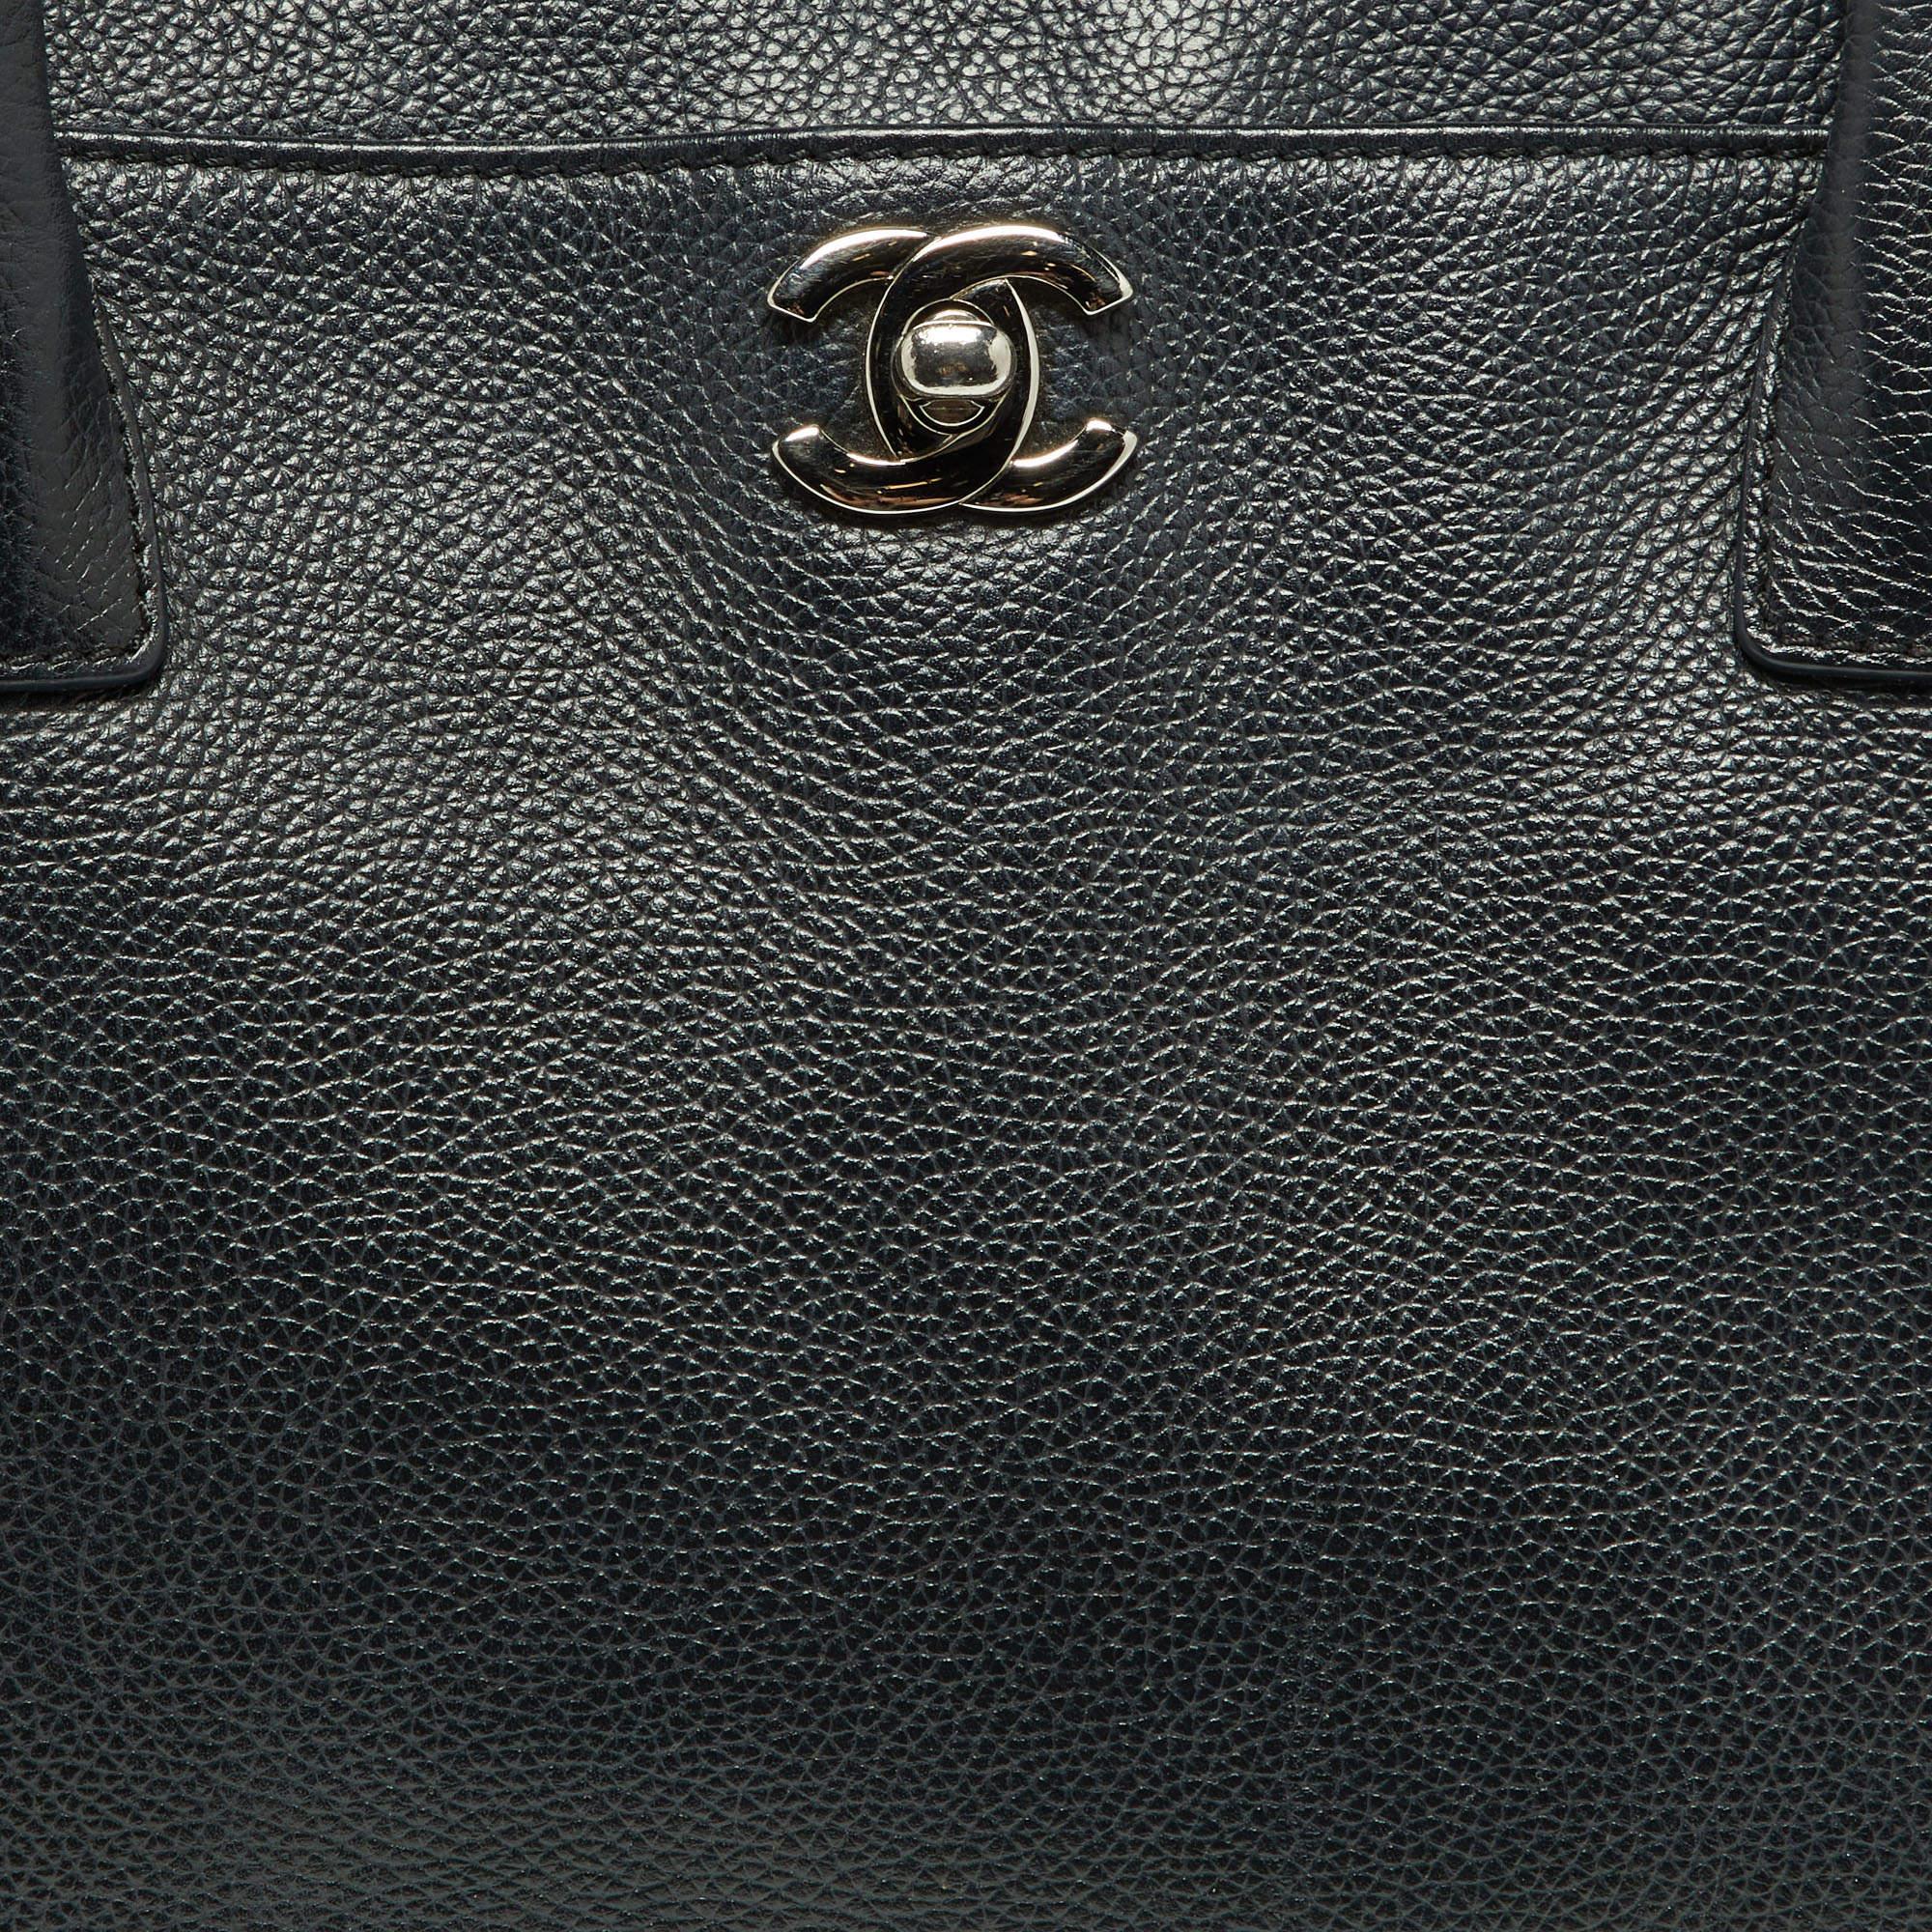 Chanel Black Leather Cerf Shopper Tote For Sale 11